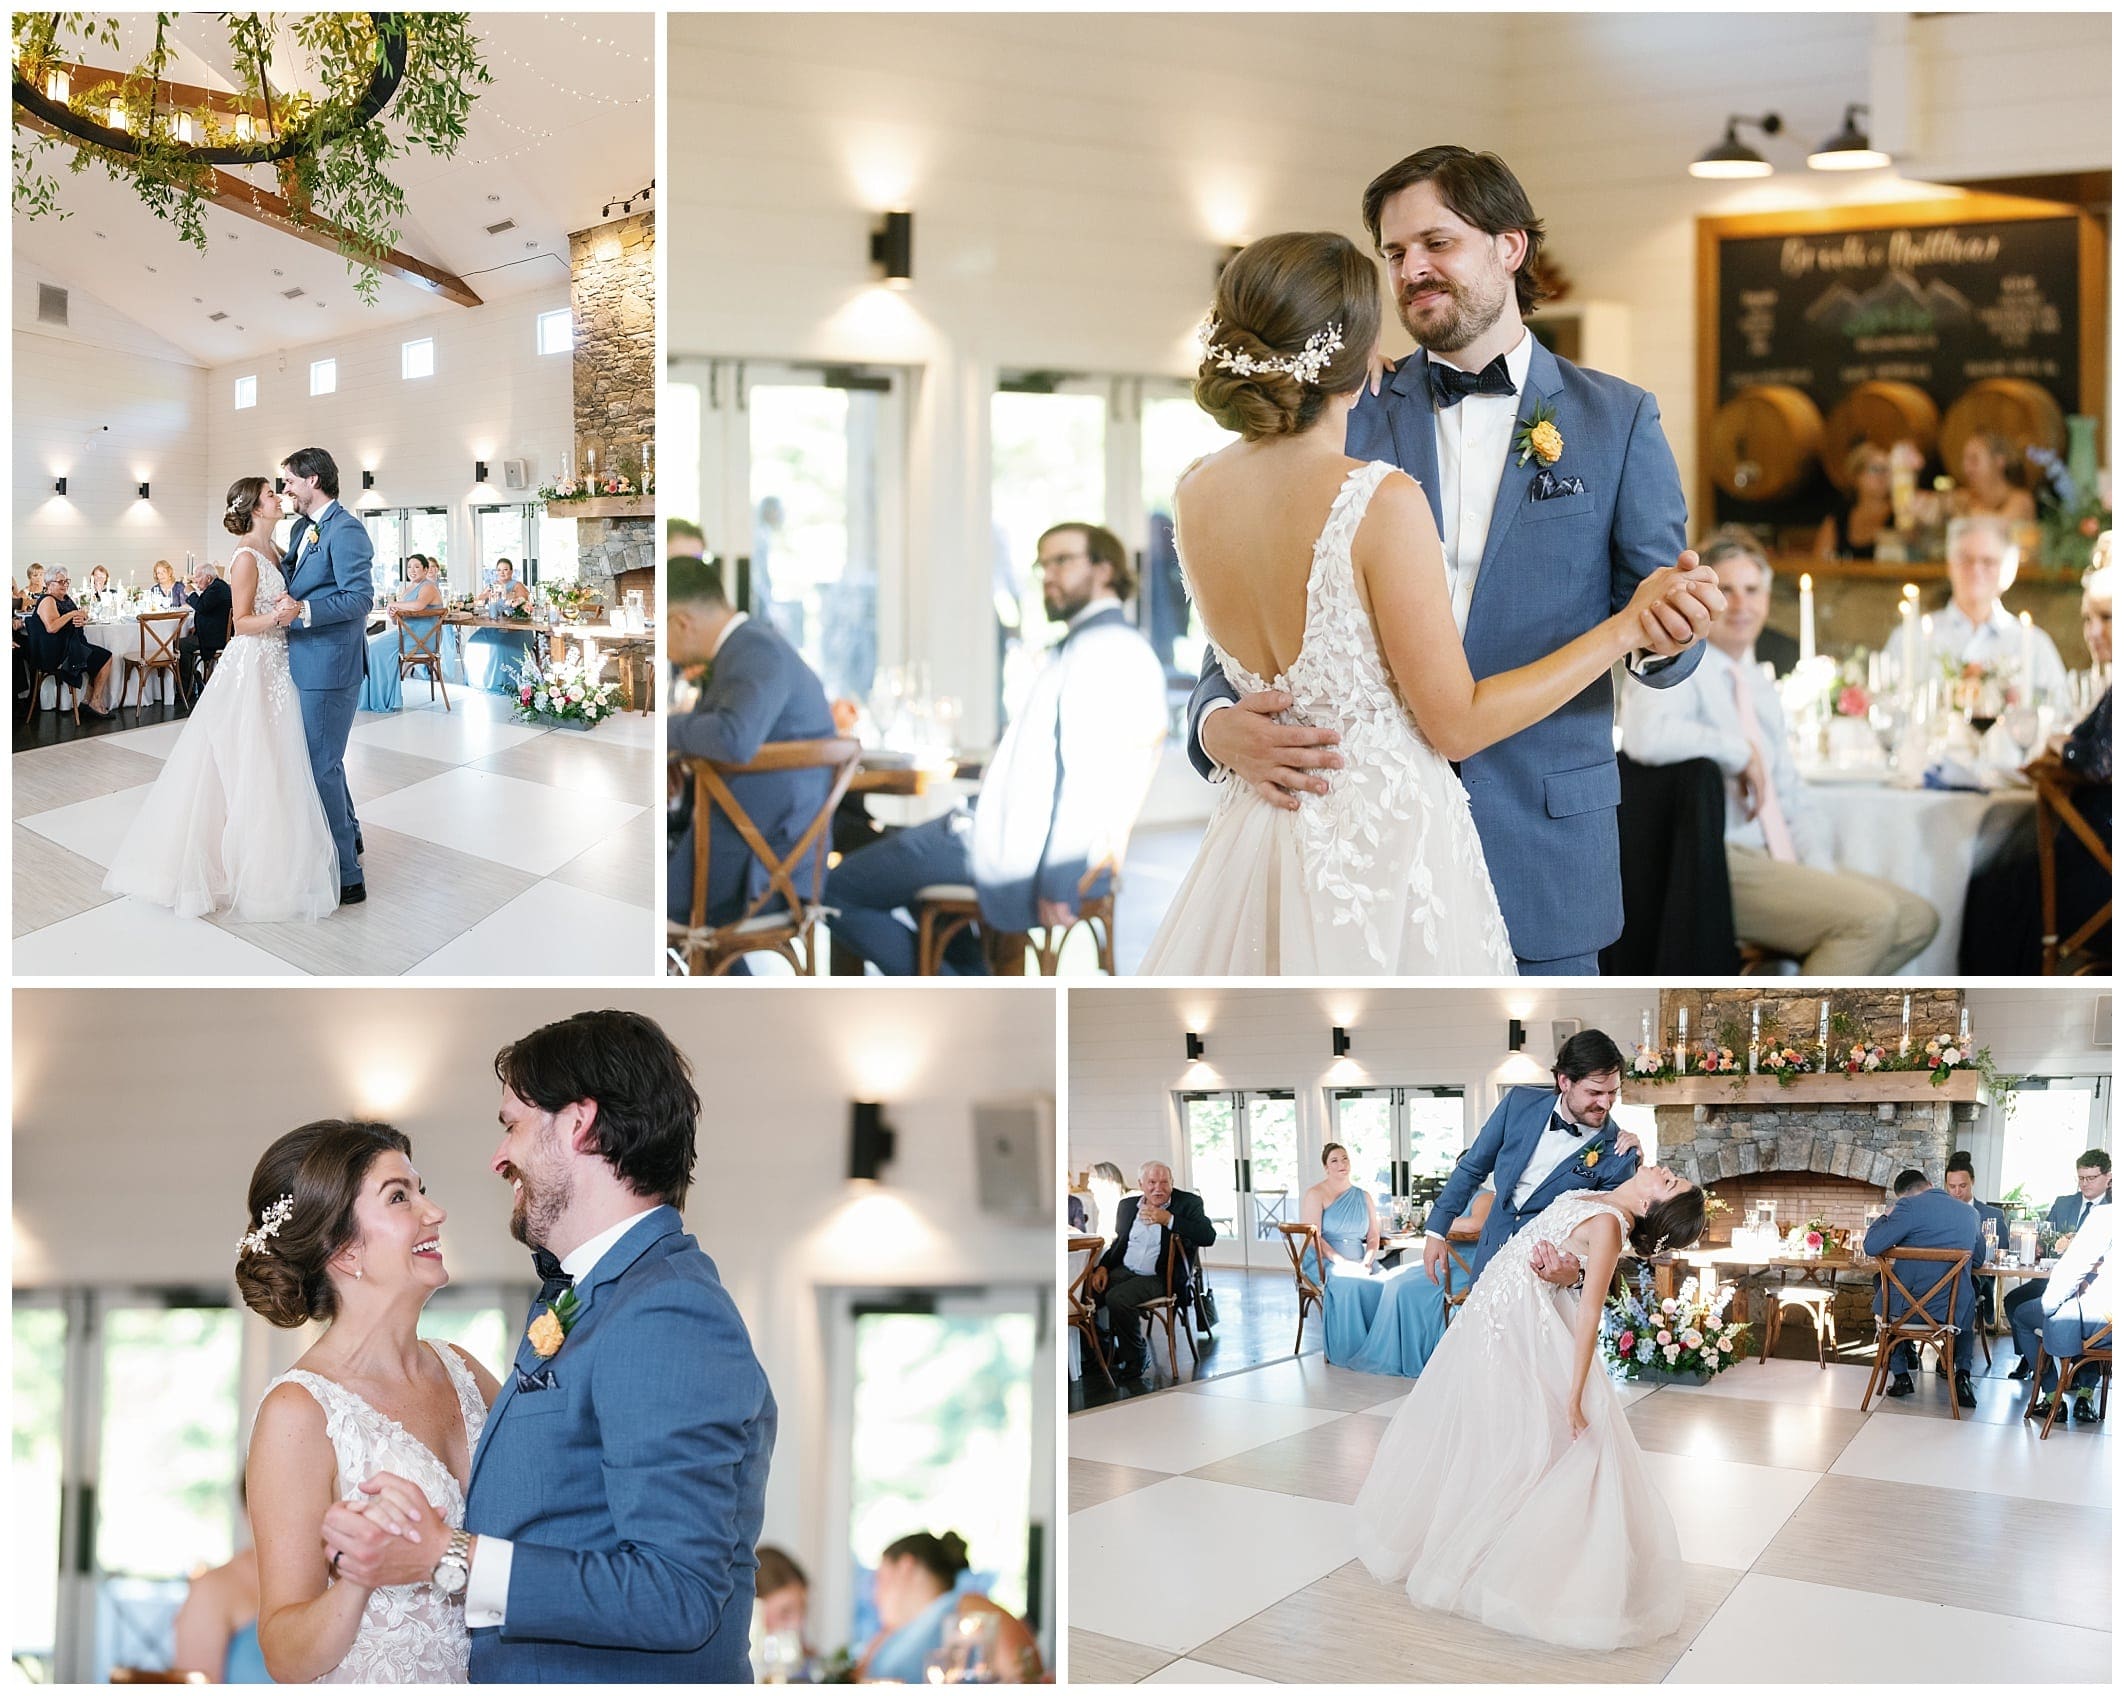 A bride and groom's first dance at their wedding reception.